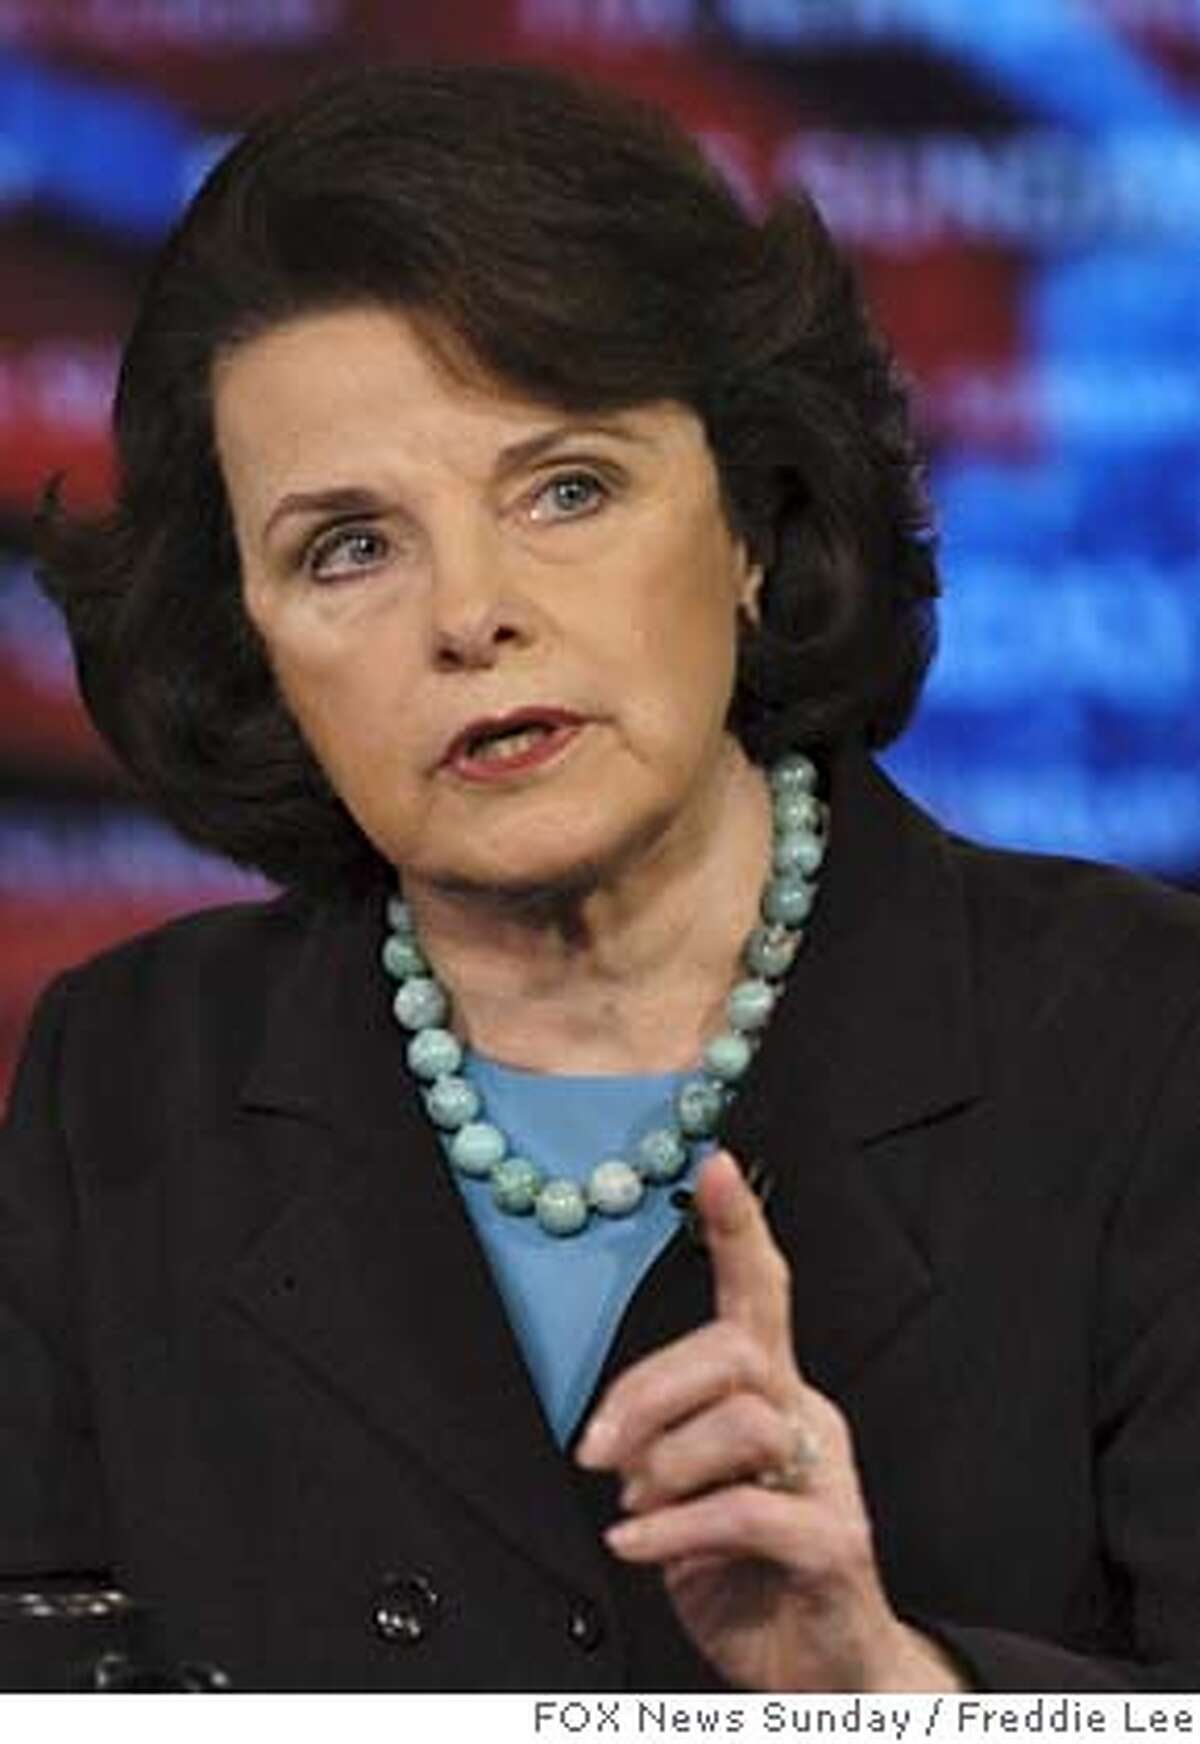 In this photo provided by FOX News, Sen. Dianne Feinstein, D-Calif., appears on "Fox News Sunday" in Washington, Sunday, March 25, 2007. (AP Photo/FOX News Sunday, Freddie Lee) MANDATORY CREDIT: FREDDIE LEE, FOX NEWS SUNDAY Ran on: 03-26-2007 Ran on: 03-26-2007 Sen. Dianne Feinstein, left, says Attorney General Alberto Gon- zales has lost her confidence. Ran on: 03-26-2007 Ran on: 03-26-2007 Sen. Dianne Feinstein, left, says Attorney General Alberto Gon- zales has lost her confidence. Ran on: 05-18-2007 Democratic senators Dianne Feinstein, left, and Chuck Schumer said they would offer a no-confidence resolution as early as next week. Ran on: 08-02-2007 Sen. Dianne Feinstein said of the plan by Westlands Water District: The devil is in the details. Ran on: 08-02-2007 MANDATORY CREDIT: FREDDIE LEE, FOX NEWS SUNDAY, NO SALES NO ARCHIVES